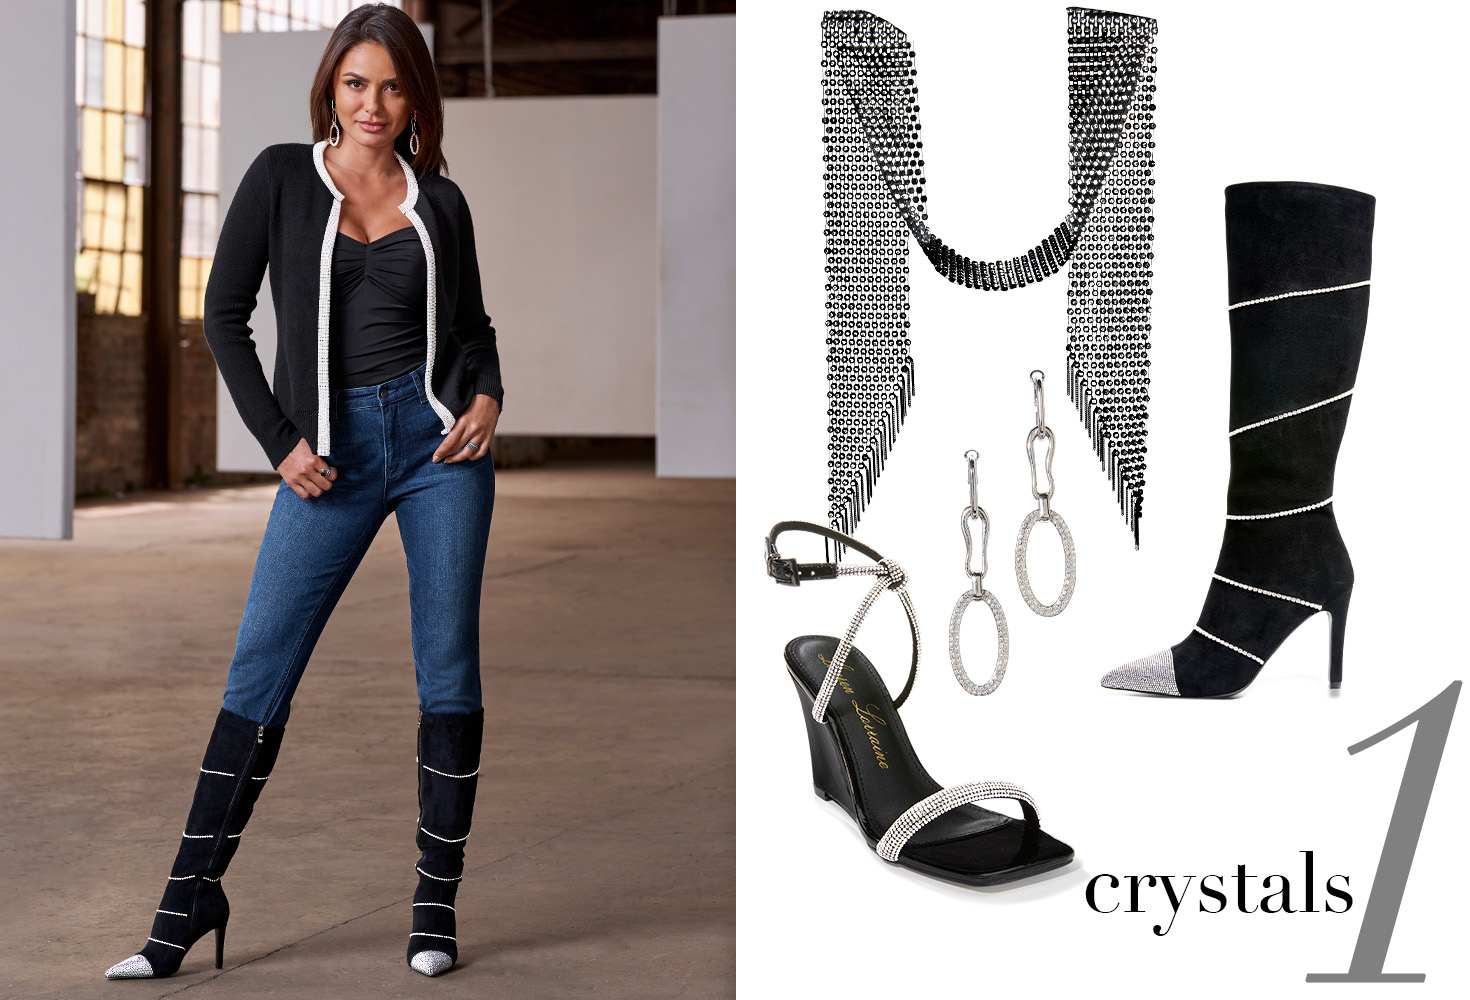 Model wearing black and embellished sweater, black top, Newport slim straight jeans and black and embellished knee high boots. Photo includes silver crystal earrings, knee high black and embellished boots, strappy black and embellished heel and a dramatic embellished scarf.